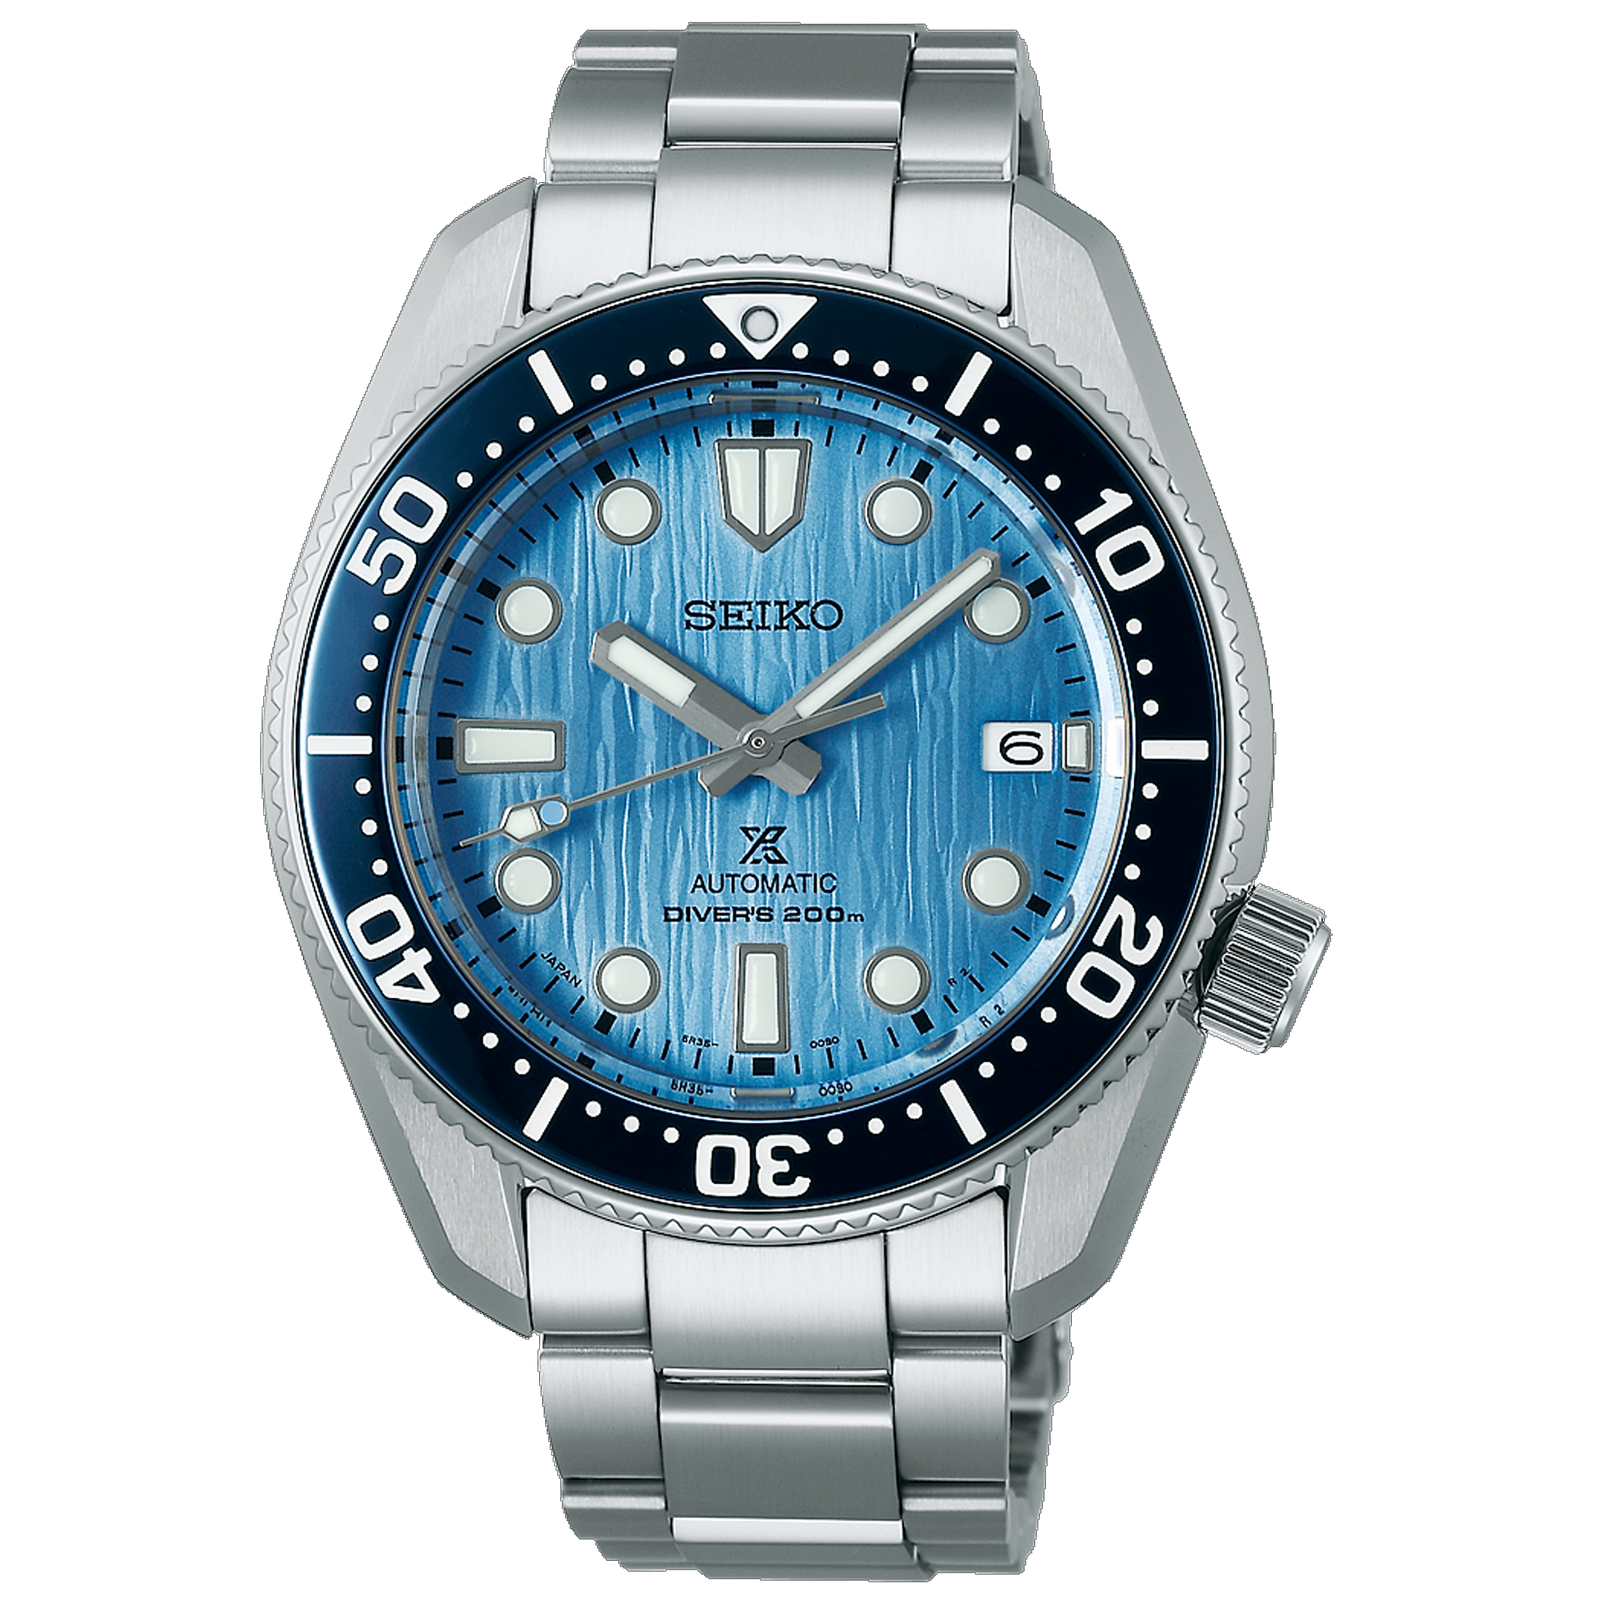 Seiko - At The Halifax Watch Company - sapphire-crystal - sapphire-crystal